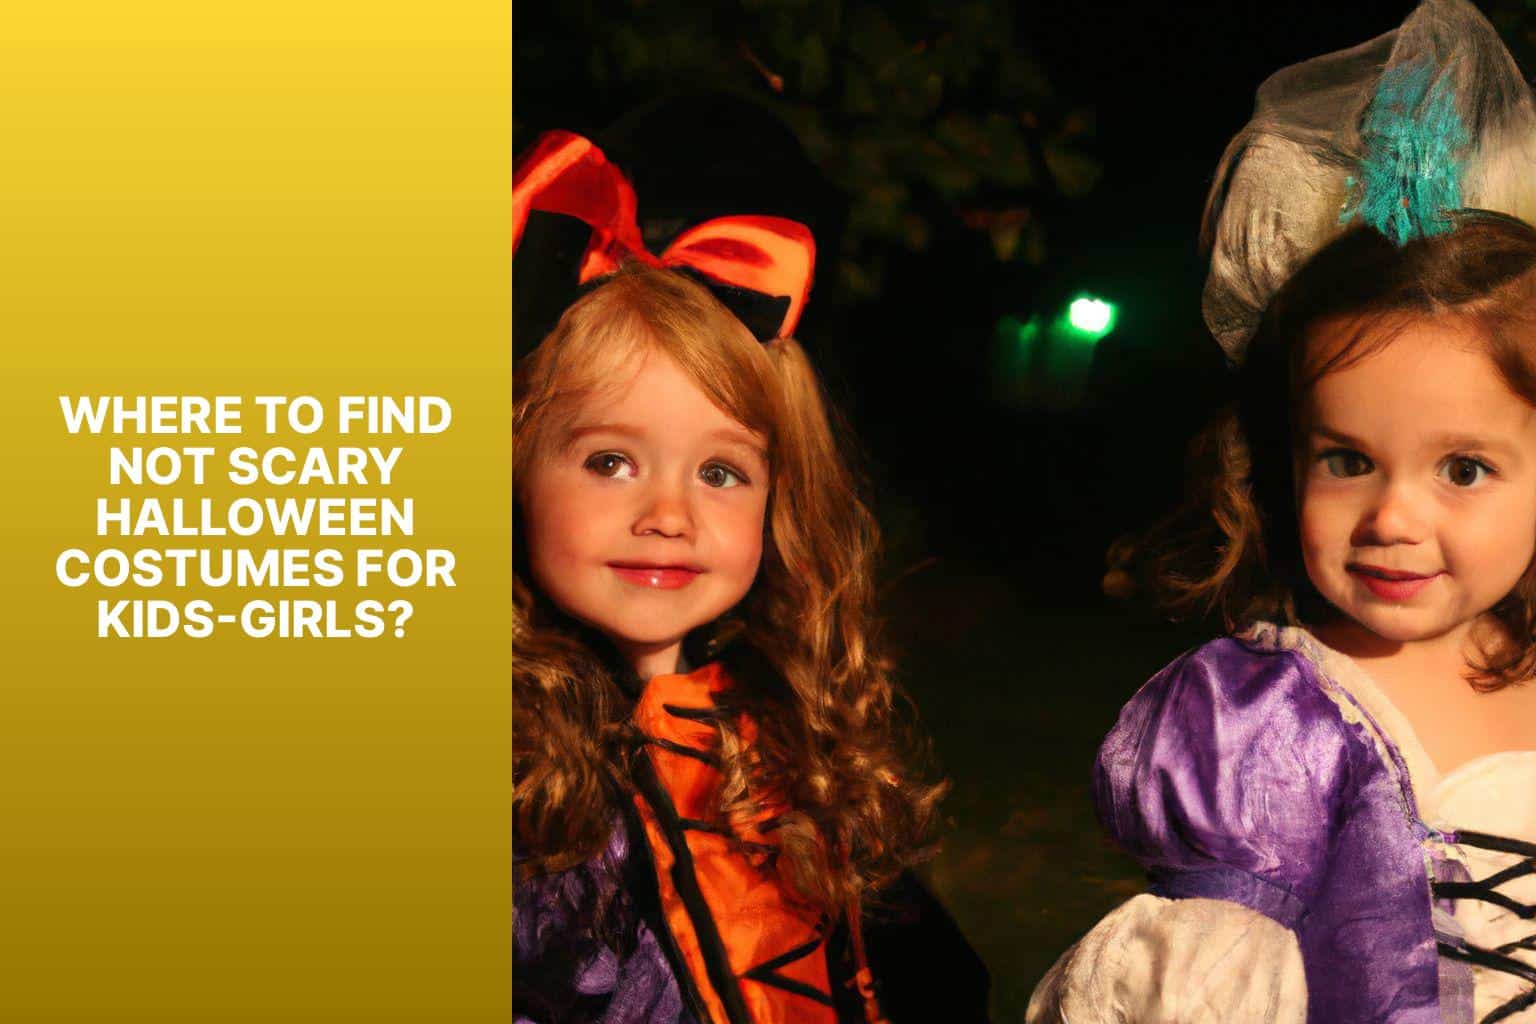 Where to Find Not Scary Halloween Costumes for Kids-Girls? - not scary halloween costumes for kids-girls 